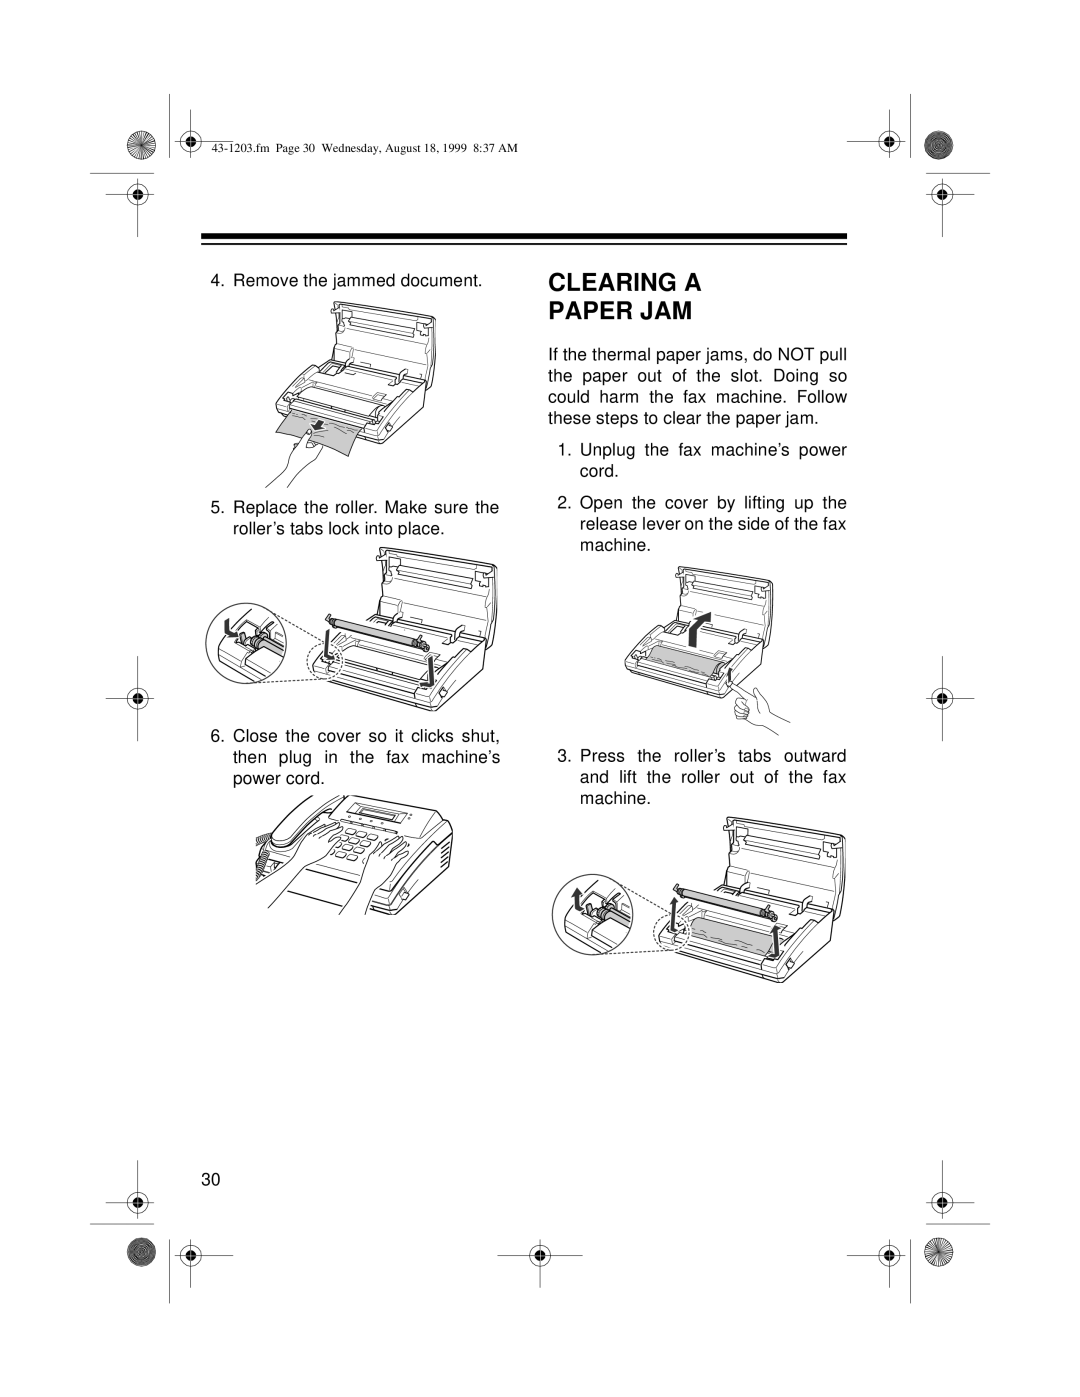 Radio Shack TFX-1031 owner manual Clearing A Paper Jam, fm Page 30 Wednesday, August 18, 1999 837 AM 